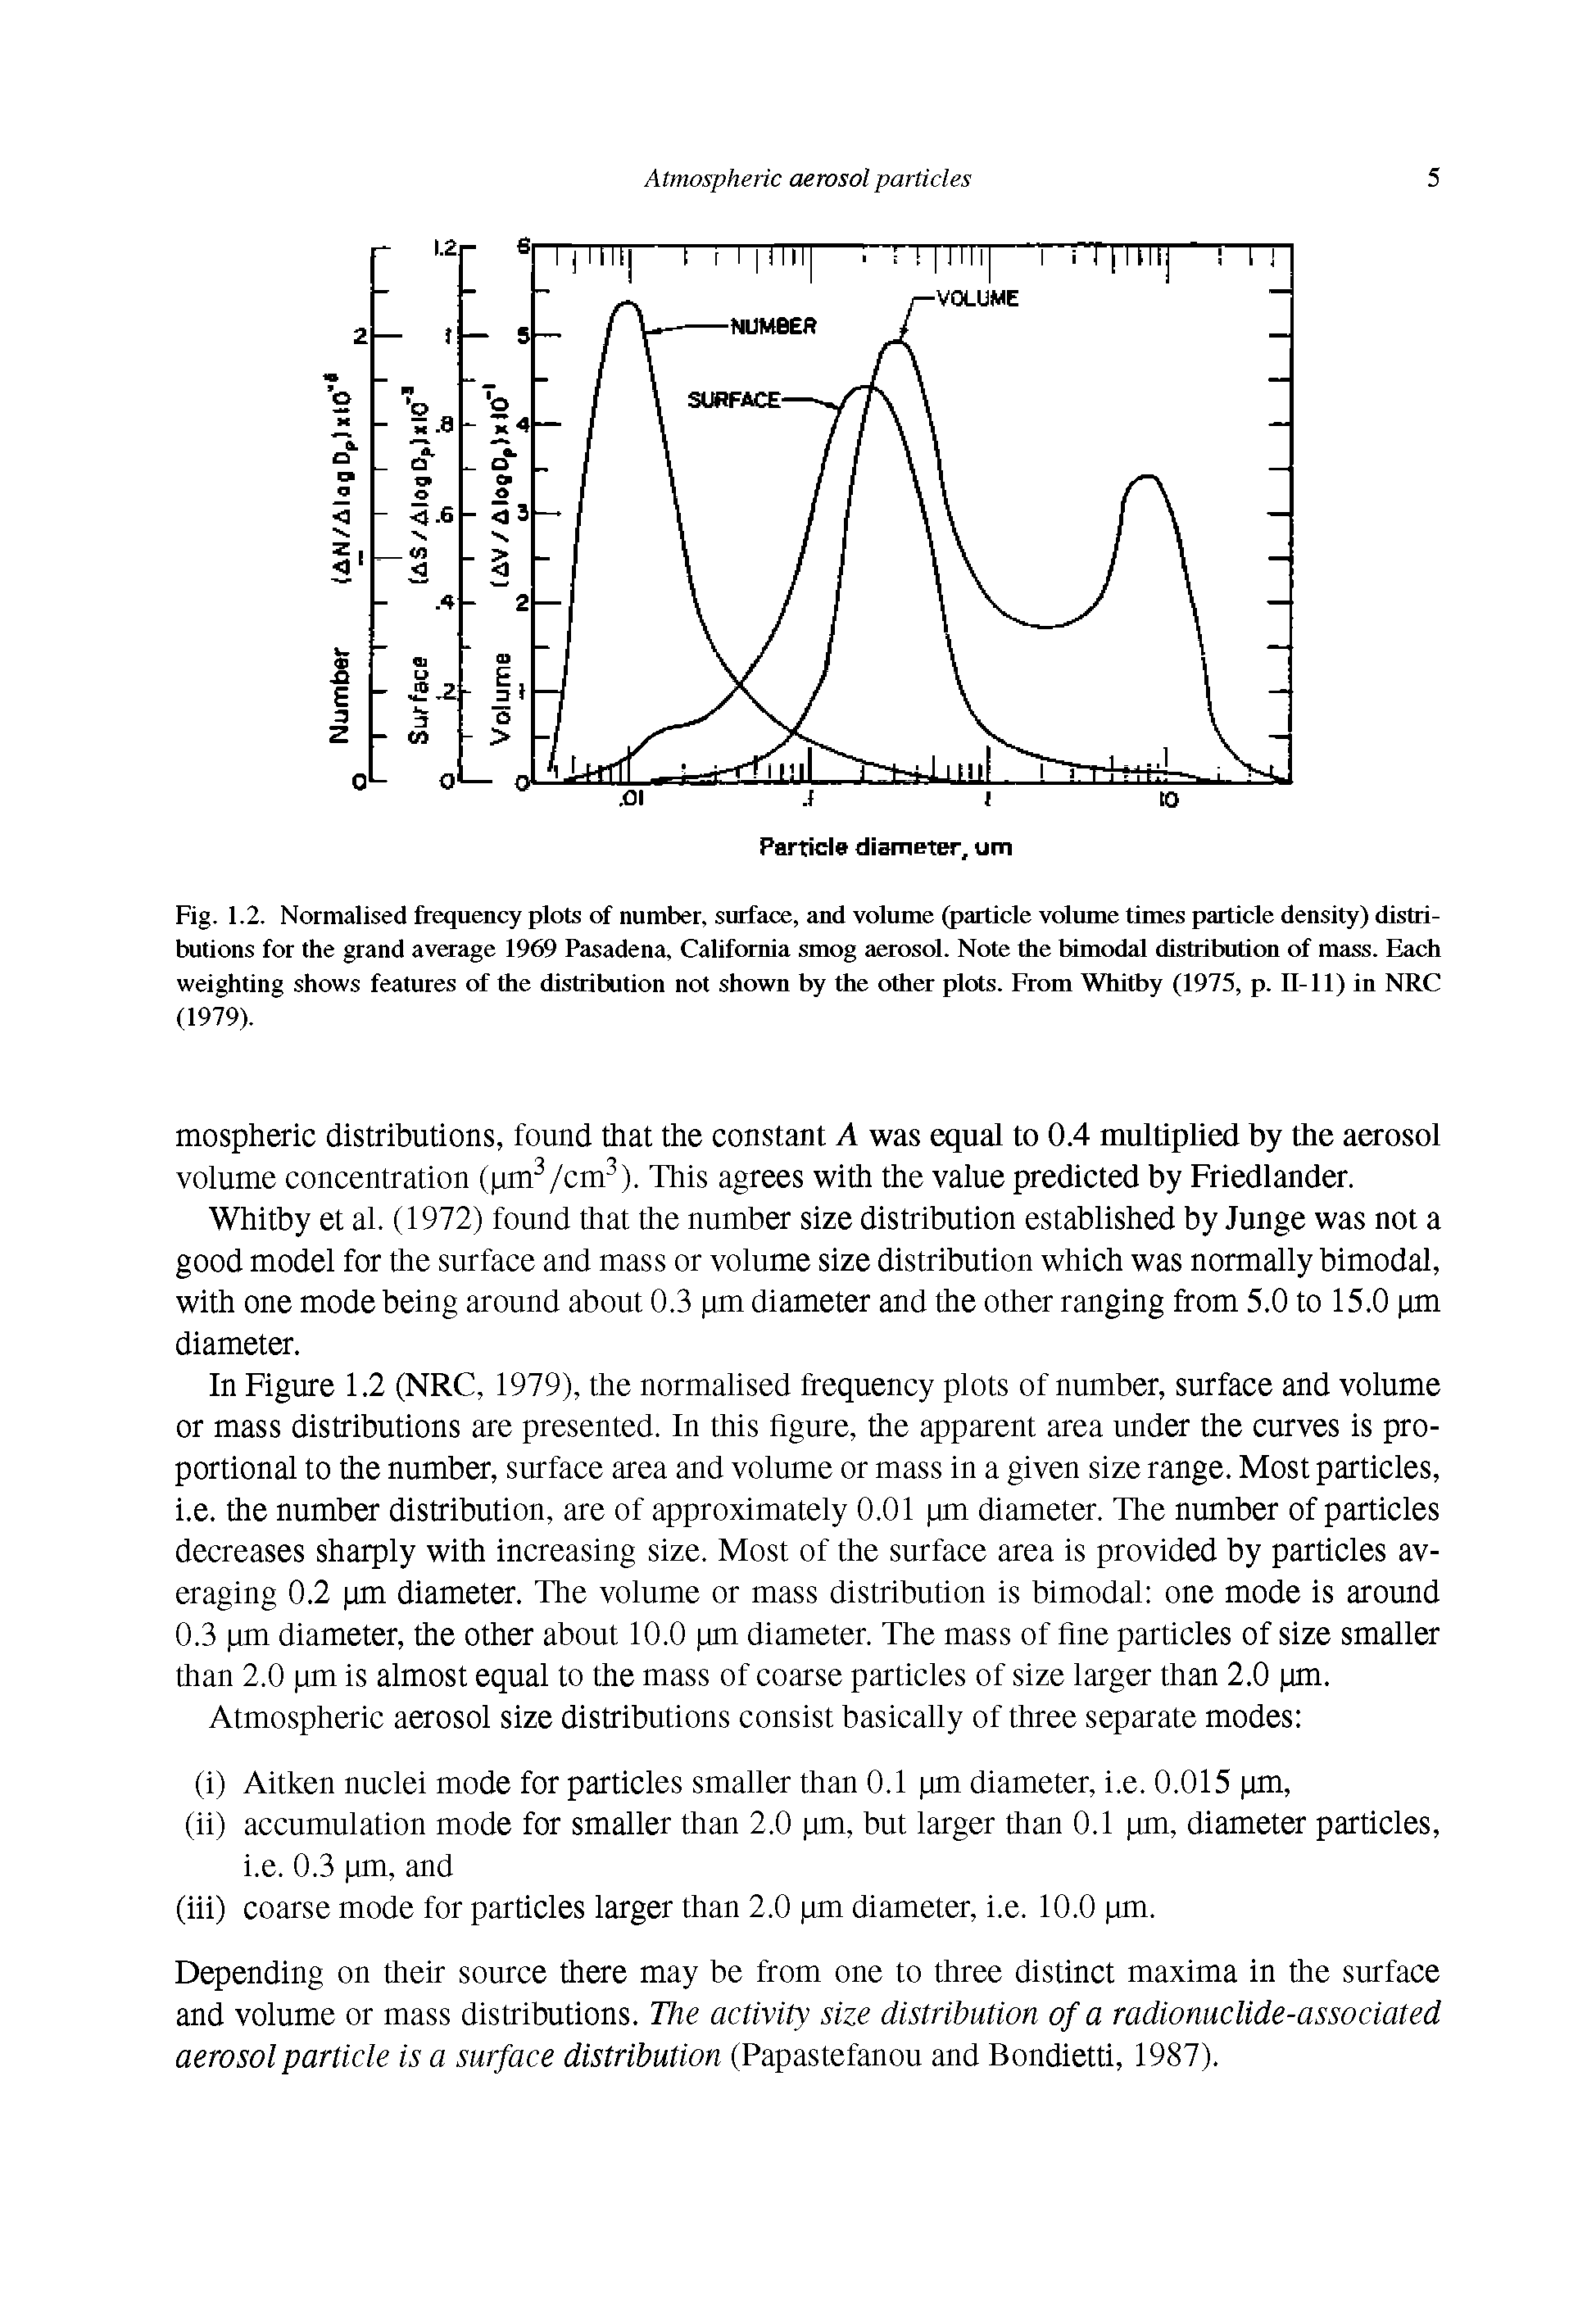 Fig. 1.2. Normalised frequency plots of number, surface, and volume (particle volume times particle density) distributions for the grand average 1969 Pasadena, California smog aerosol. Note the bimodal distribution of mass. Each weighting shows features of the distribution not shown by the other plots. From Whitby (1975, p. II-ll) in NRC (1979).